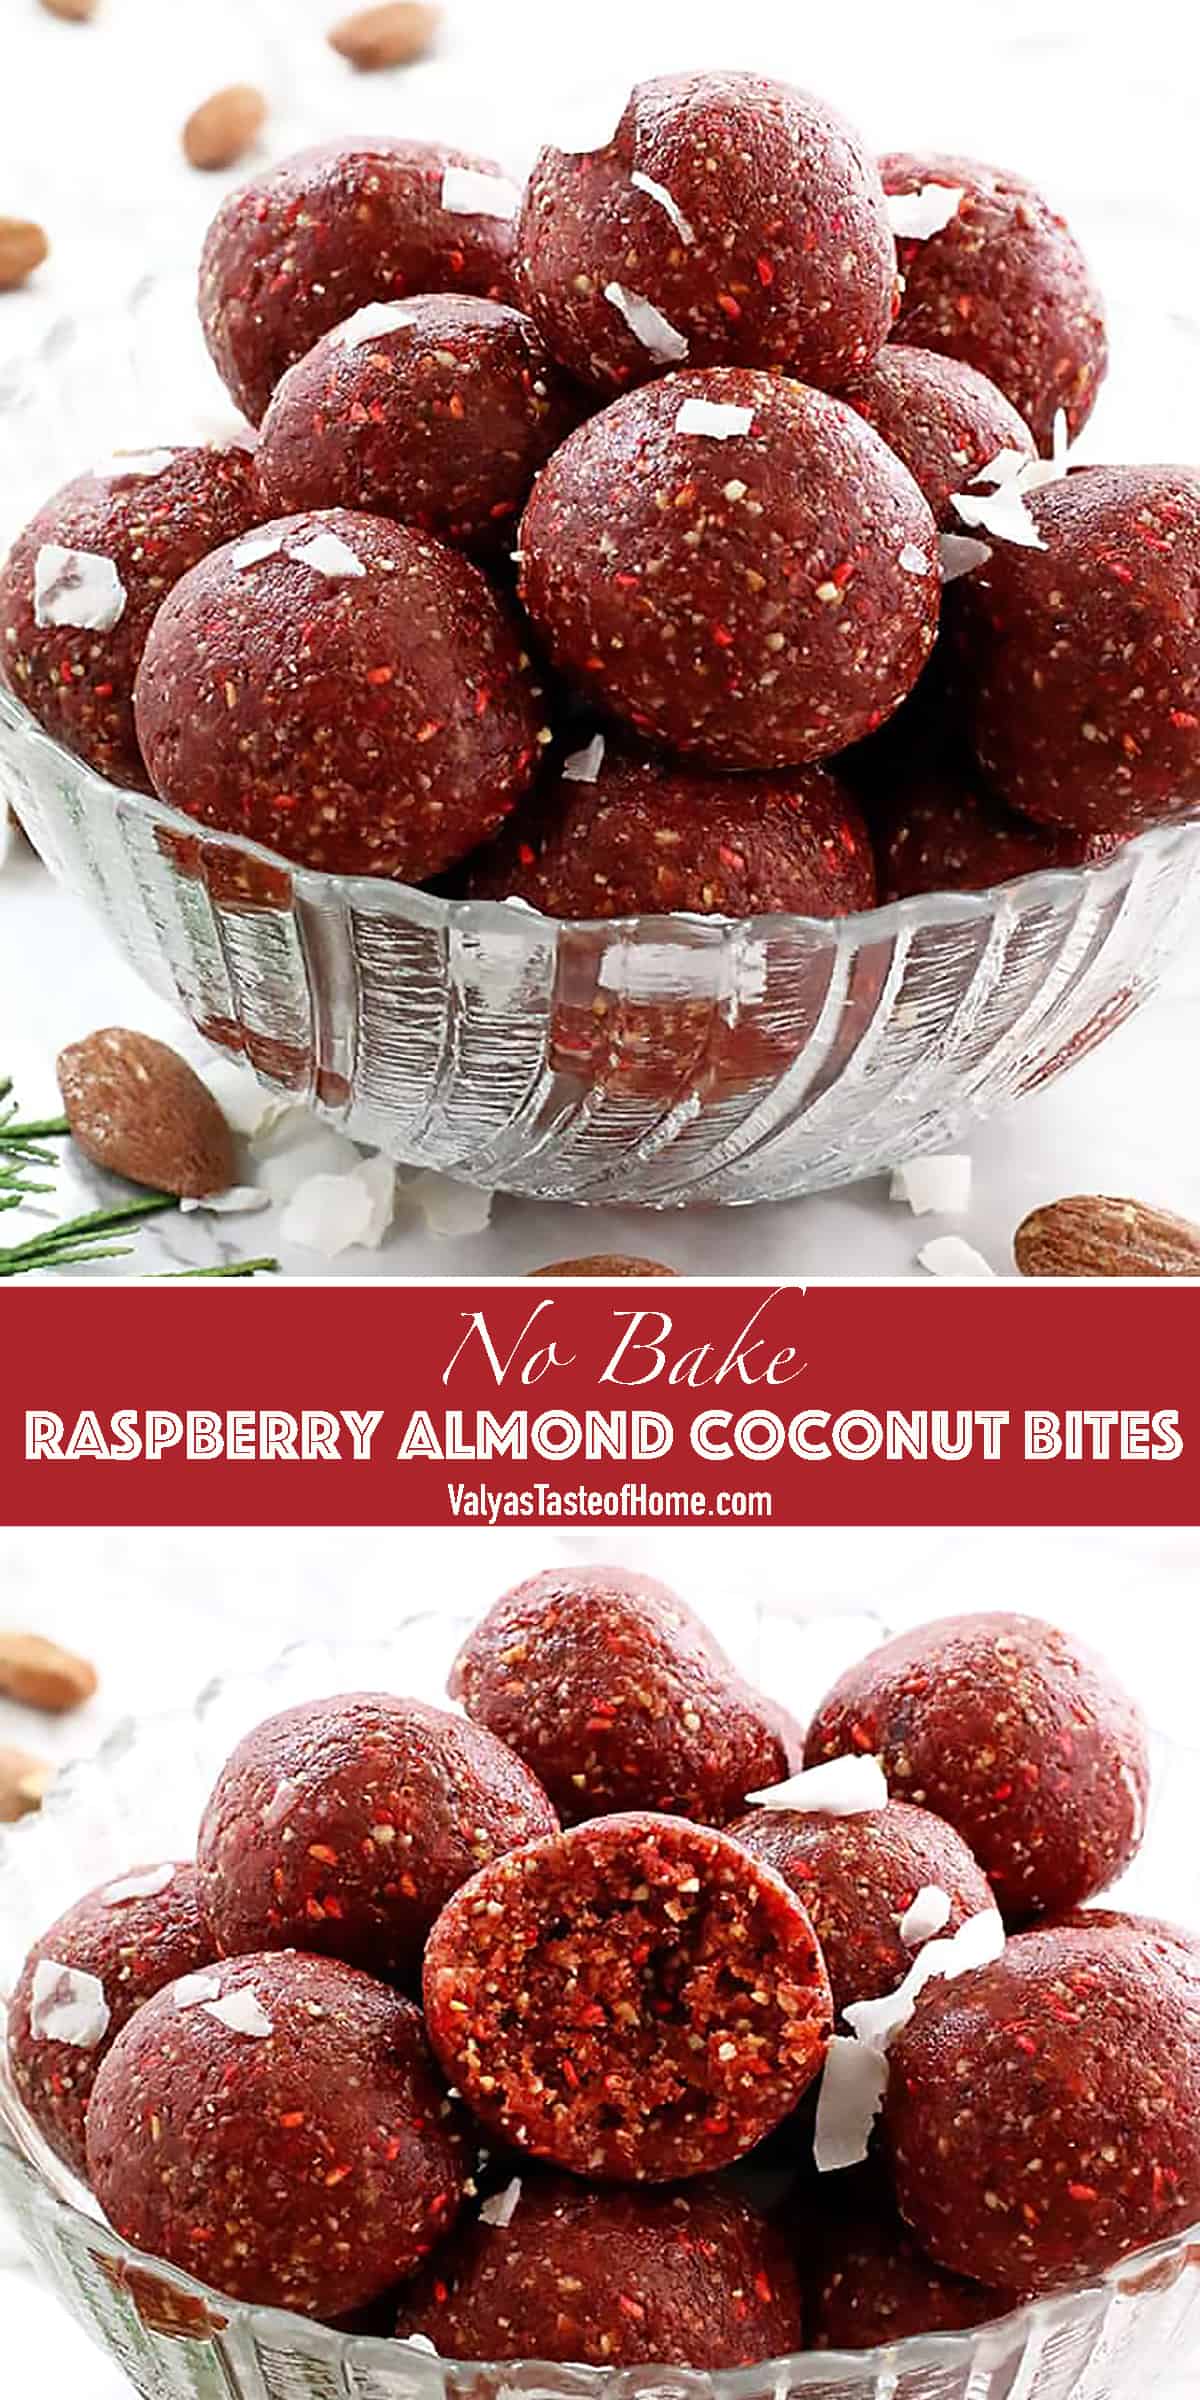 These No Bake Raspberry Almond Coconut Bites will satisfy anyone’s sweet tooth! They are chewy, tasty, loaded with nuts and freeze-dried raspberries that just blend so well together. Therefore, they are a quicker and healthier granola bar. And aren’t they cute, too?